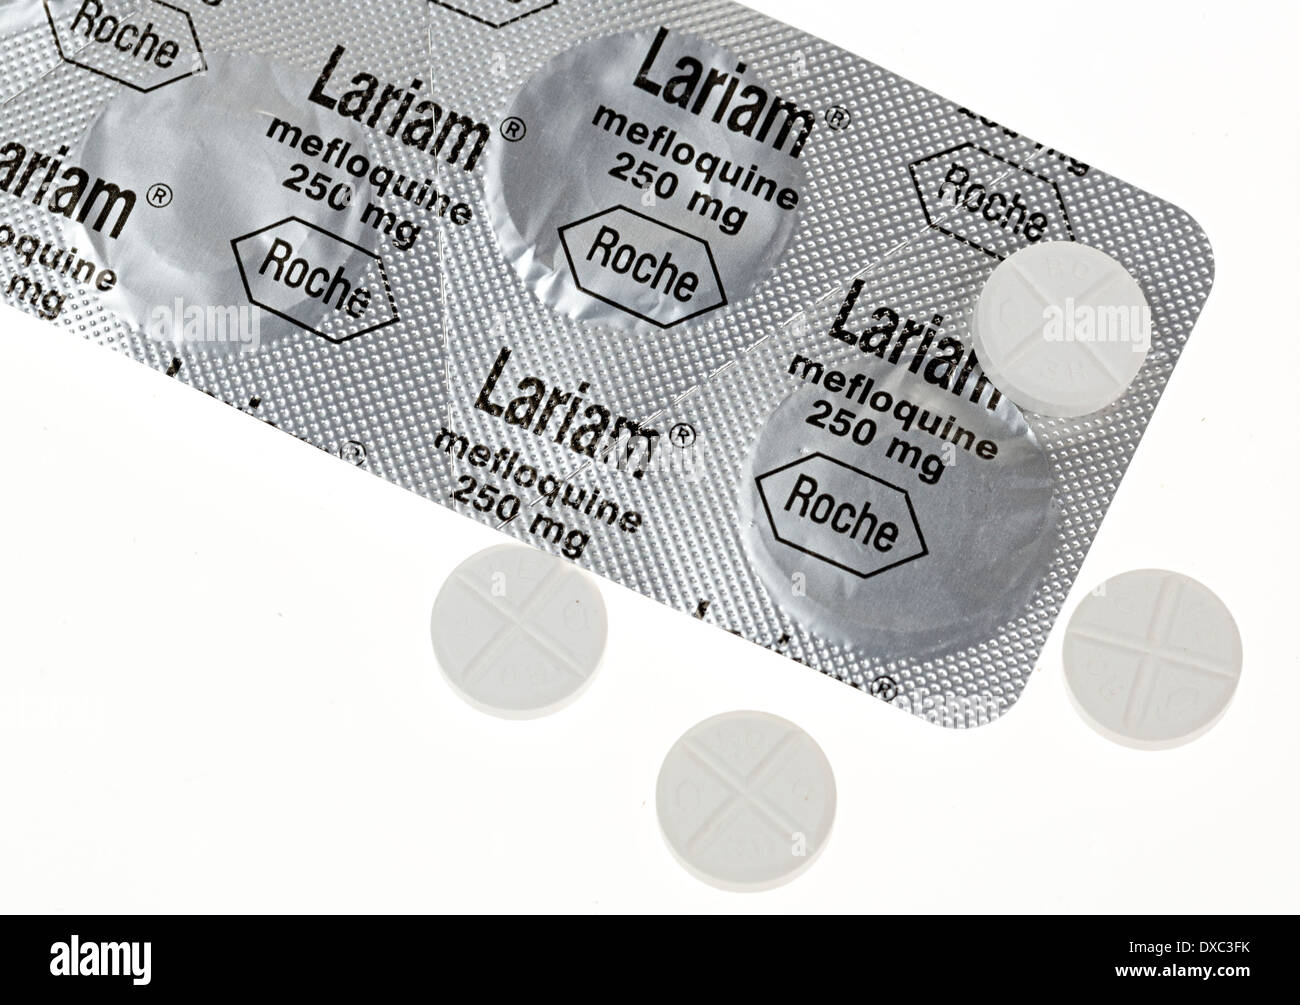 Lariam antimalarial tablets with mefloquine active ingredient Stock Photo